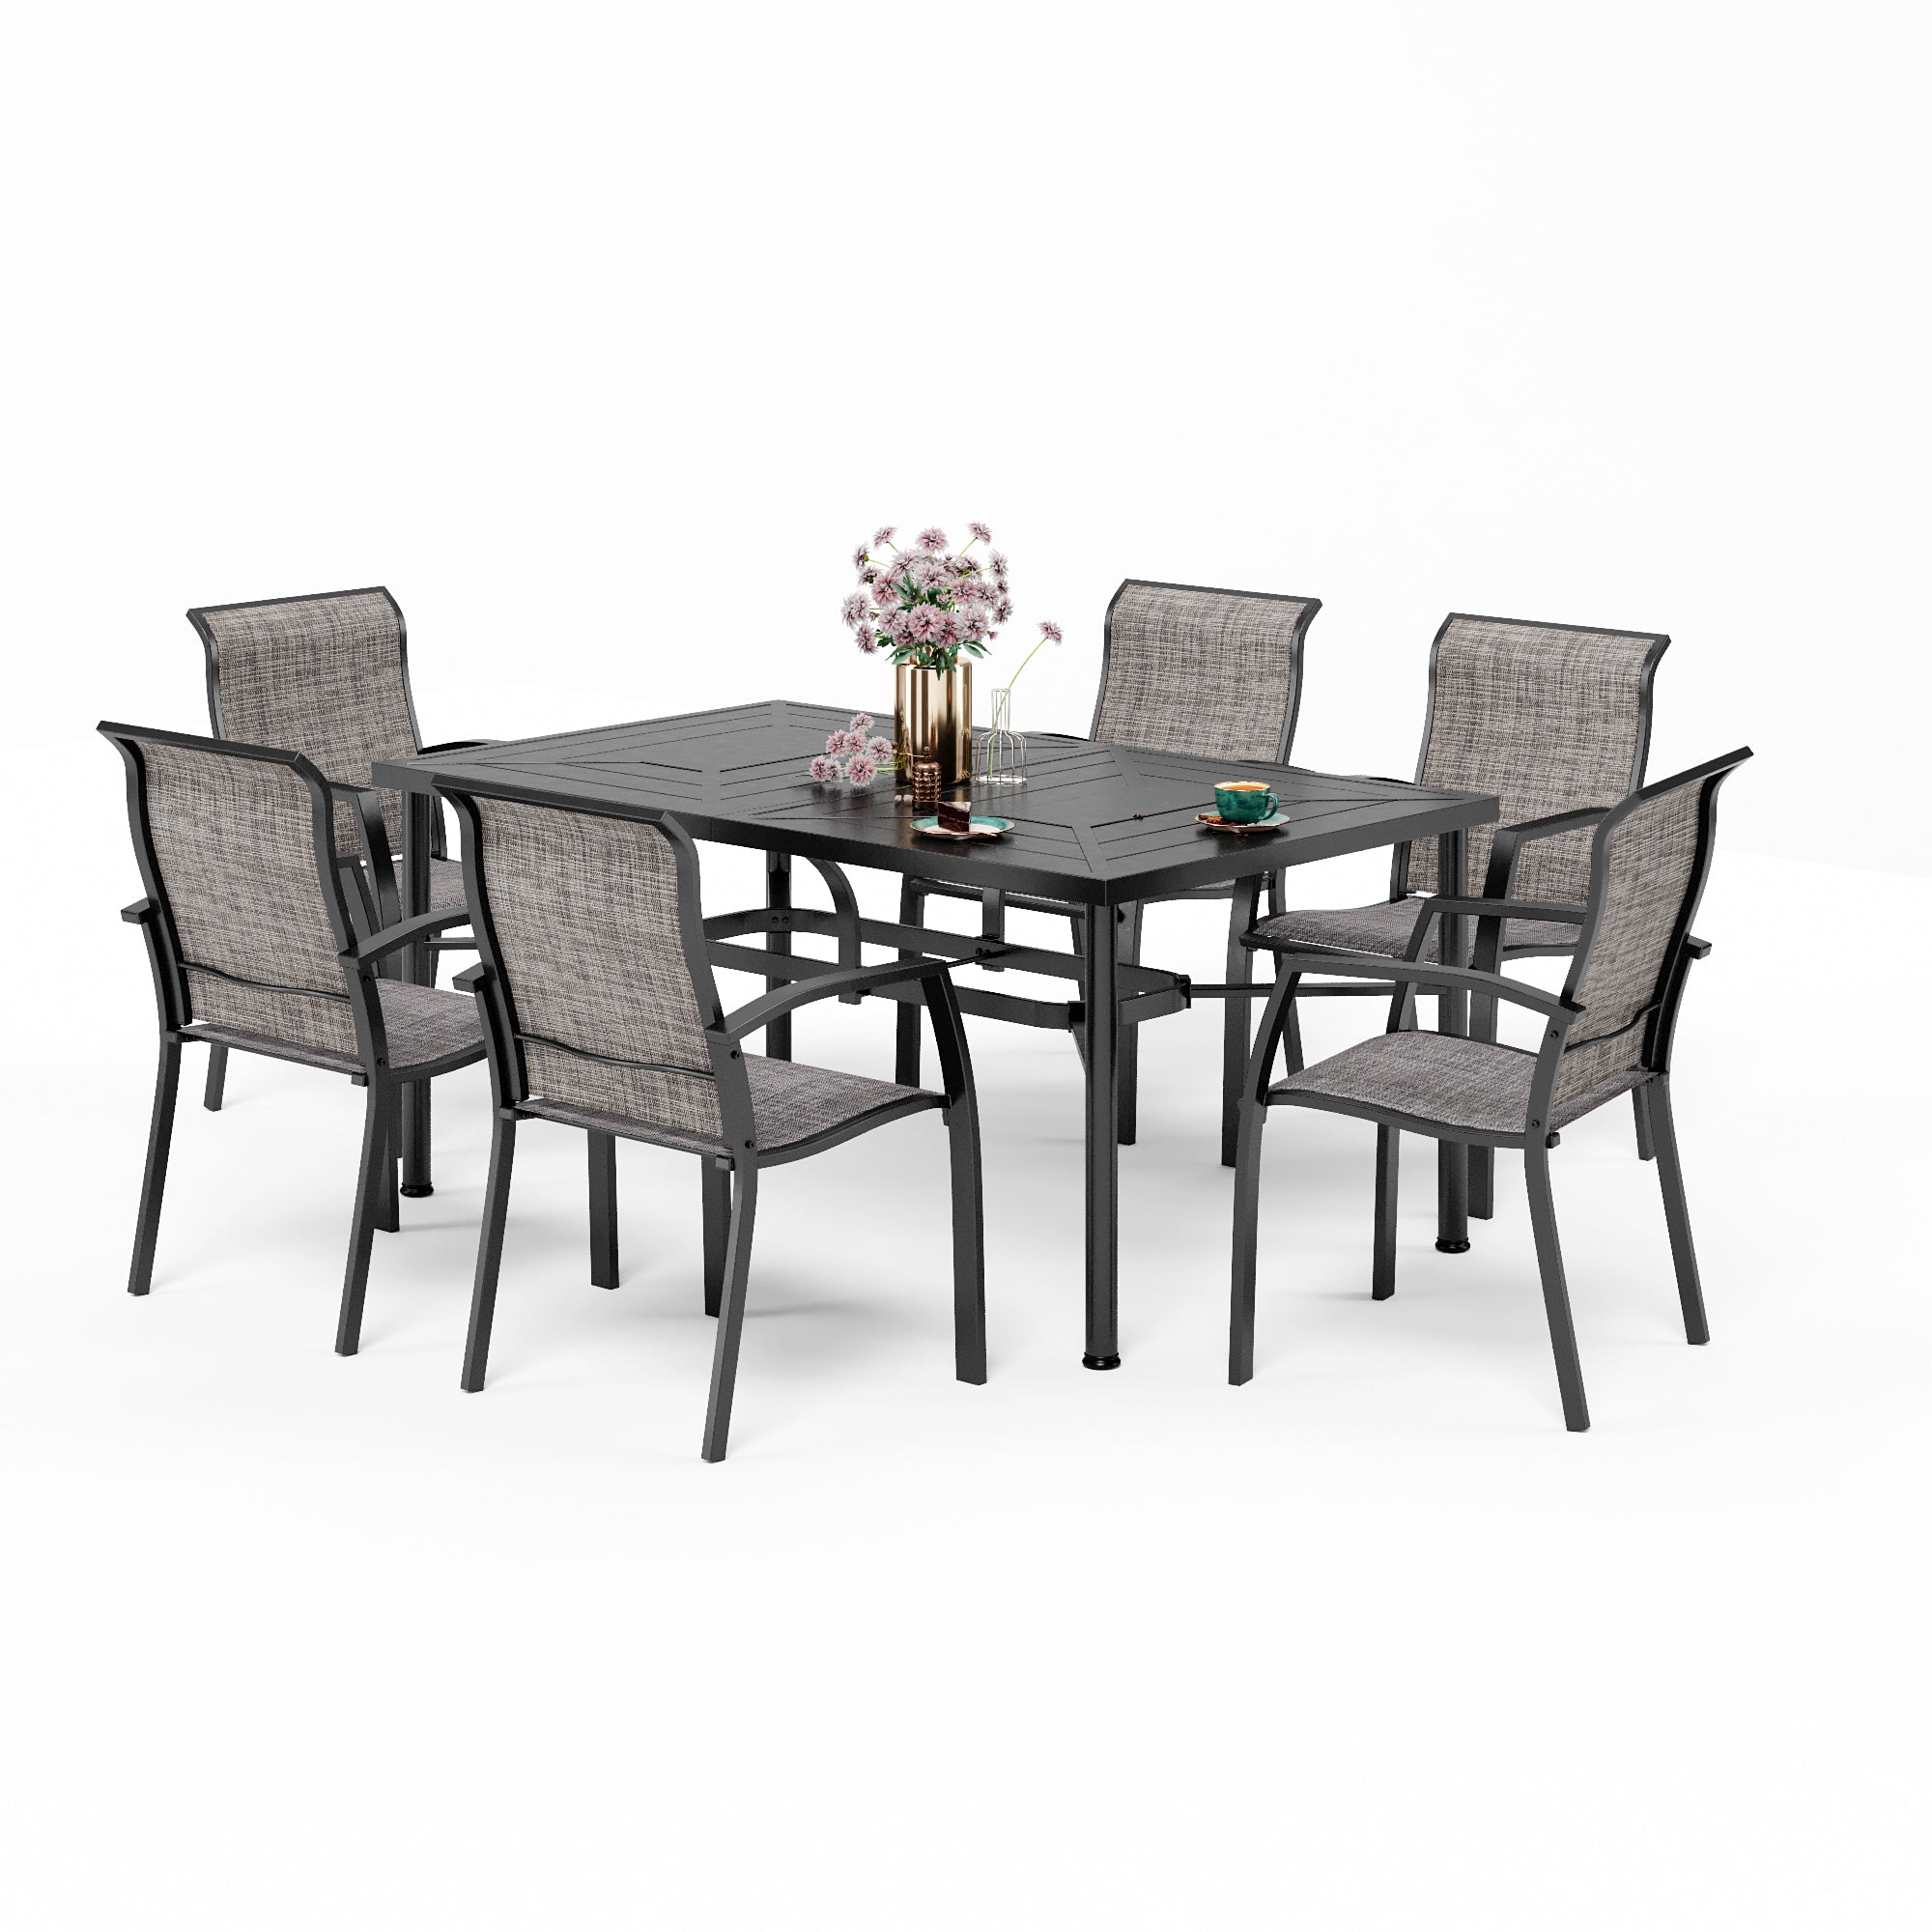 MFSTUDIO 7-Piece Patio Dining Set Geometrically Stamped Rectangle Table & Simple Aluminum Alloy Fixed Chairs